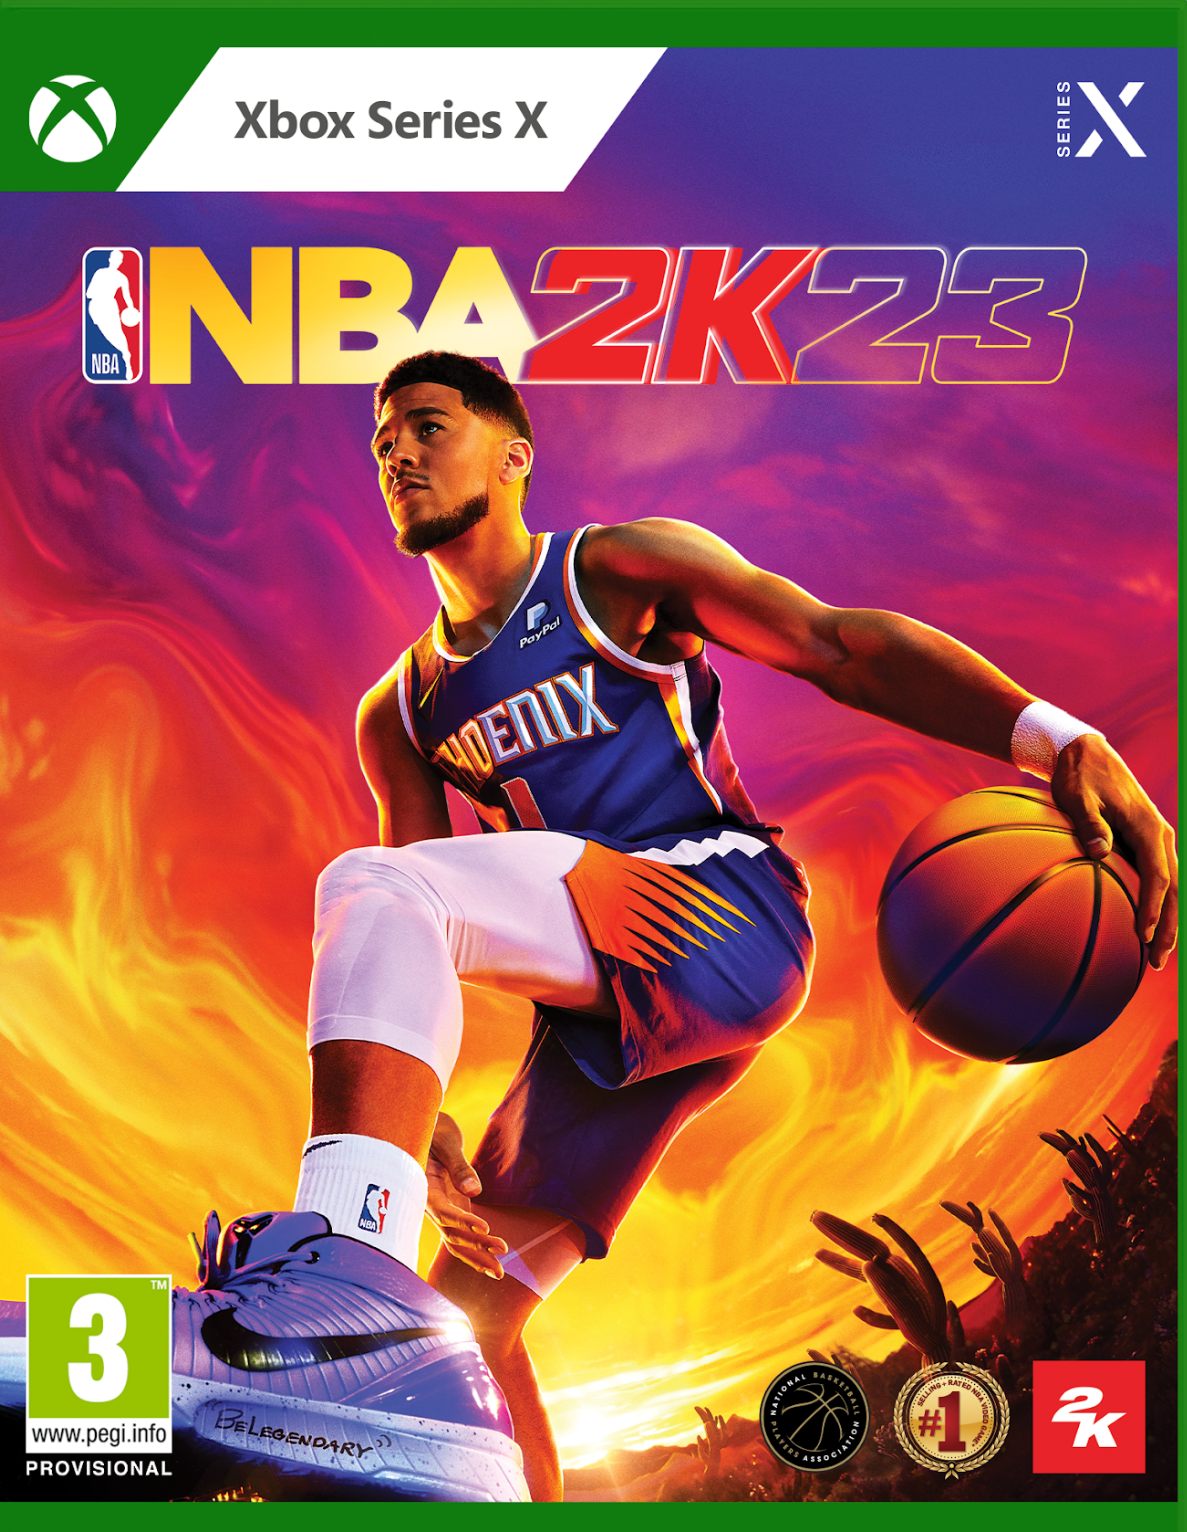 NBA 2K on X: Ready to run #NBA2K23? Pre-order 2K23 on the 2K Store with  your Amex® Card to receive a code for 35,000 in Virtual Currency 🔥 Terms  apply. Learn more @